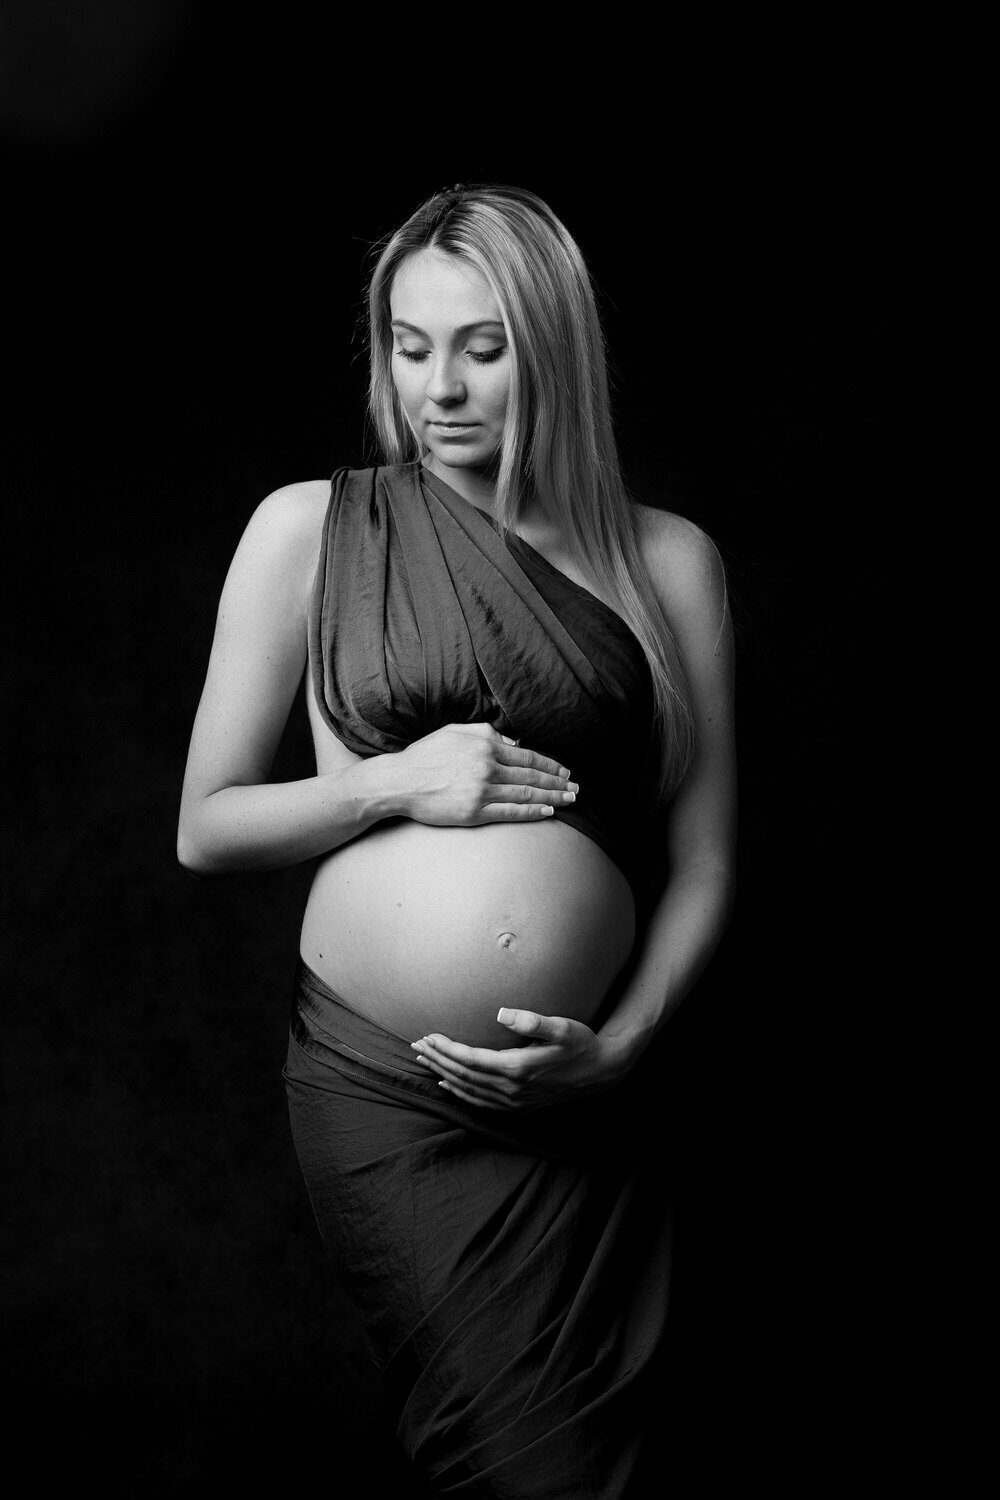 Black and white portrait of a mom-to-be